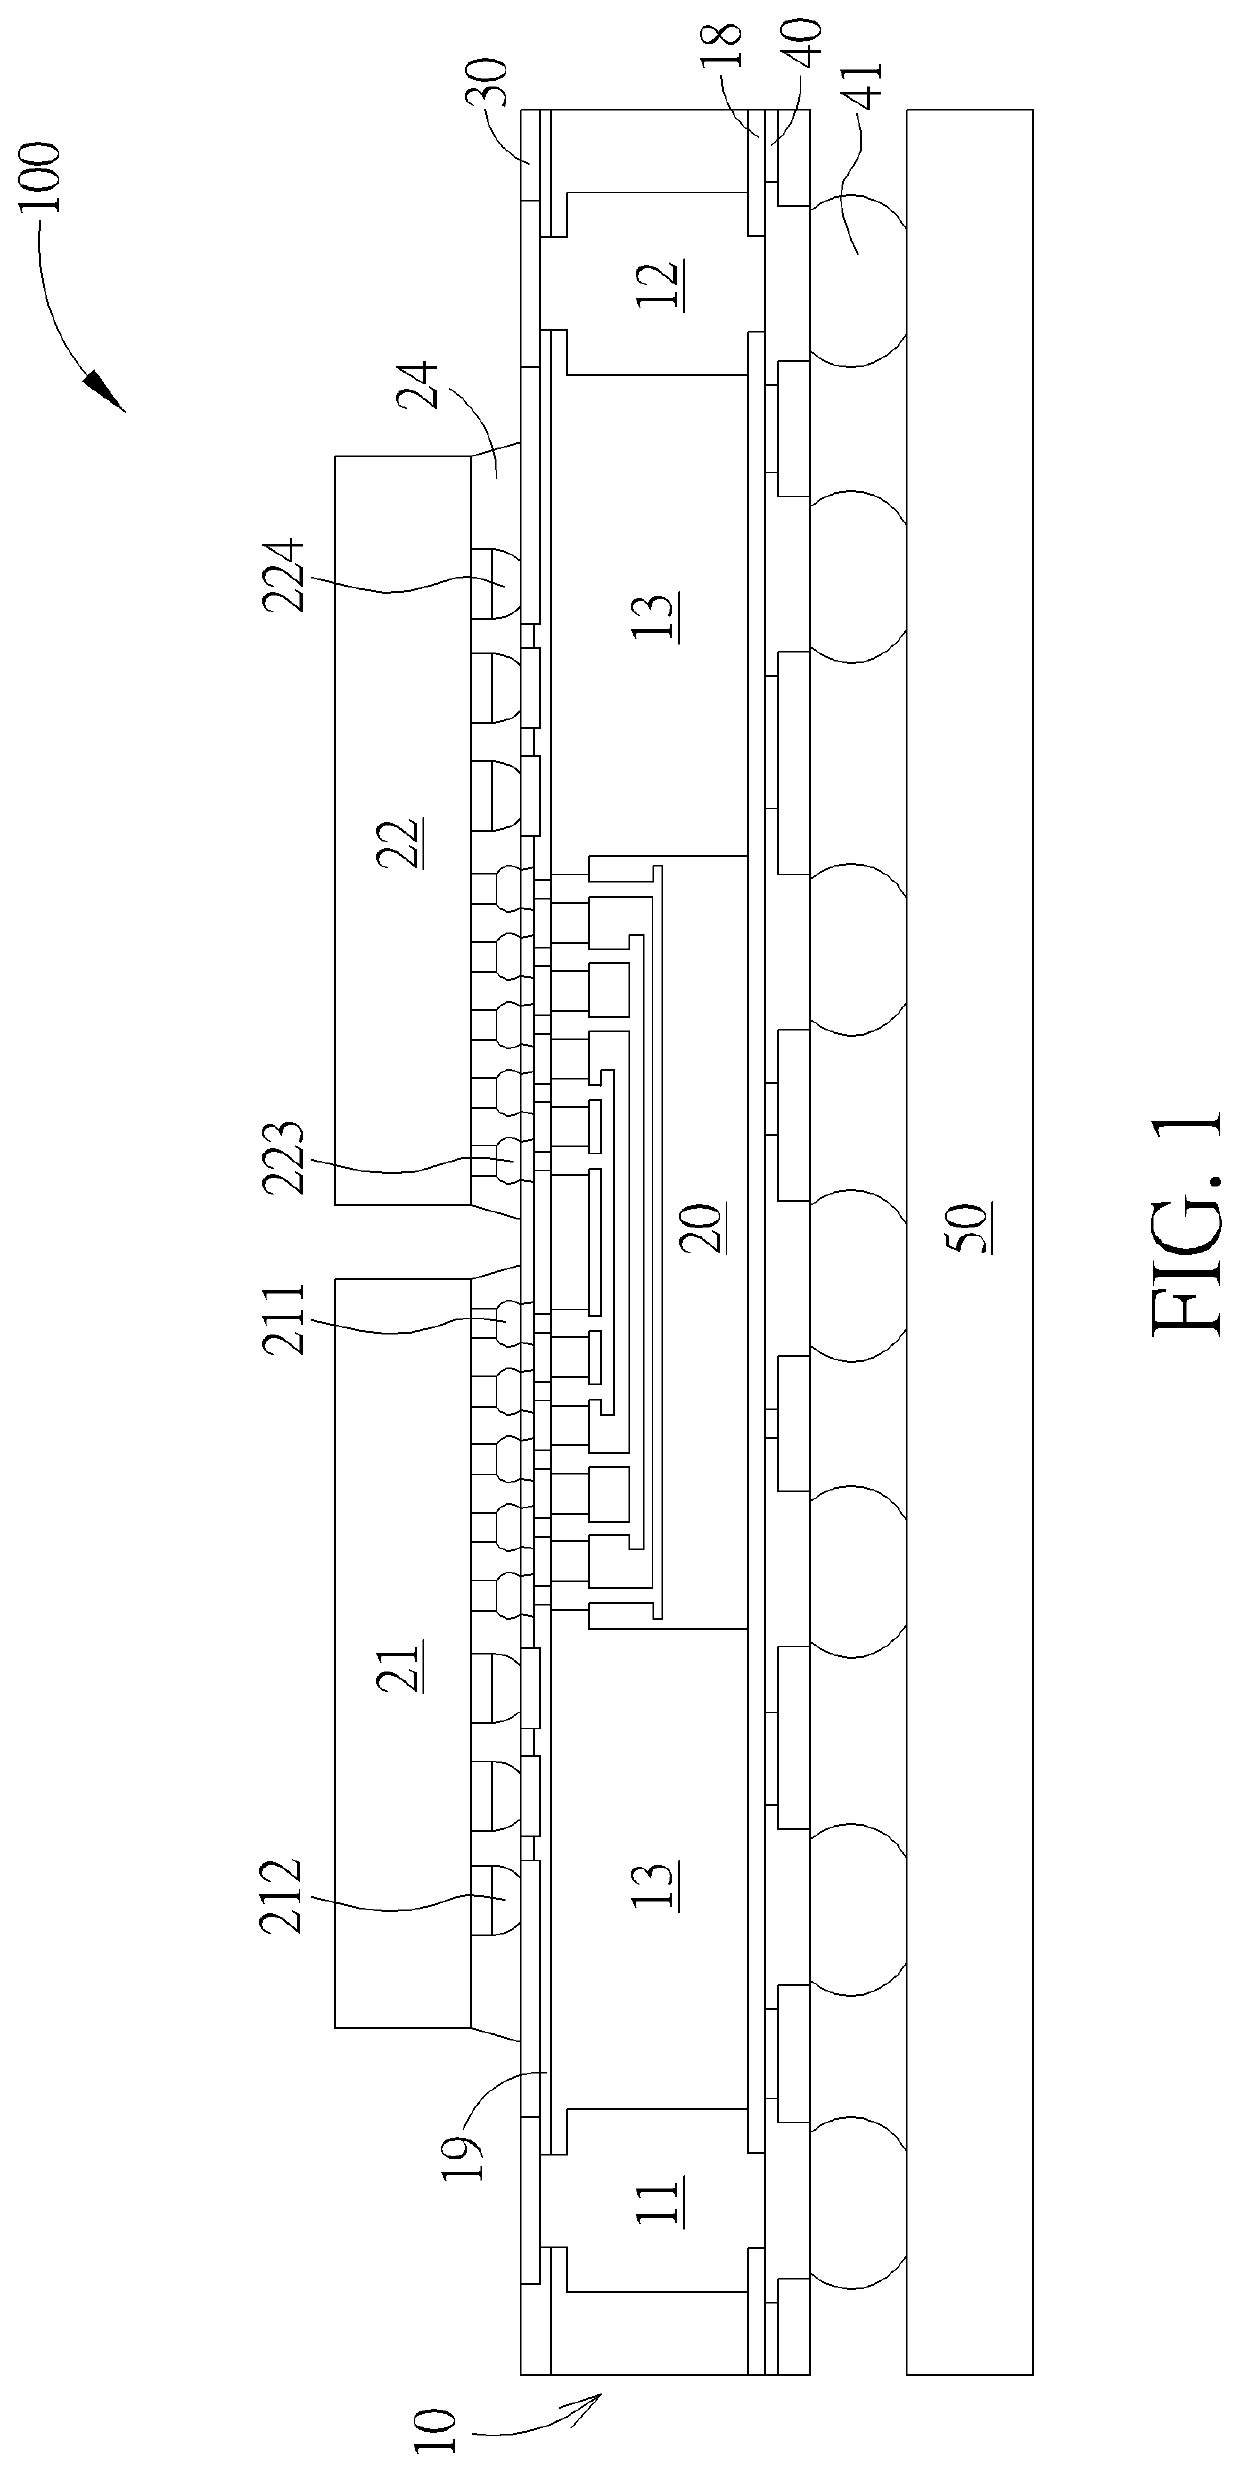 Chip package structure using silicon interposer as interconnection bridge